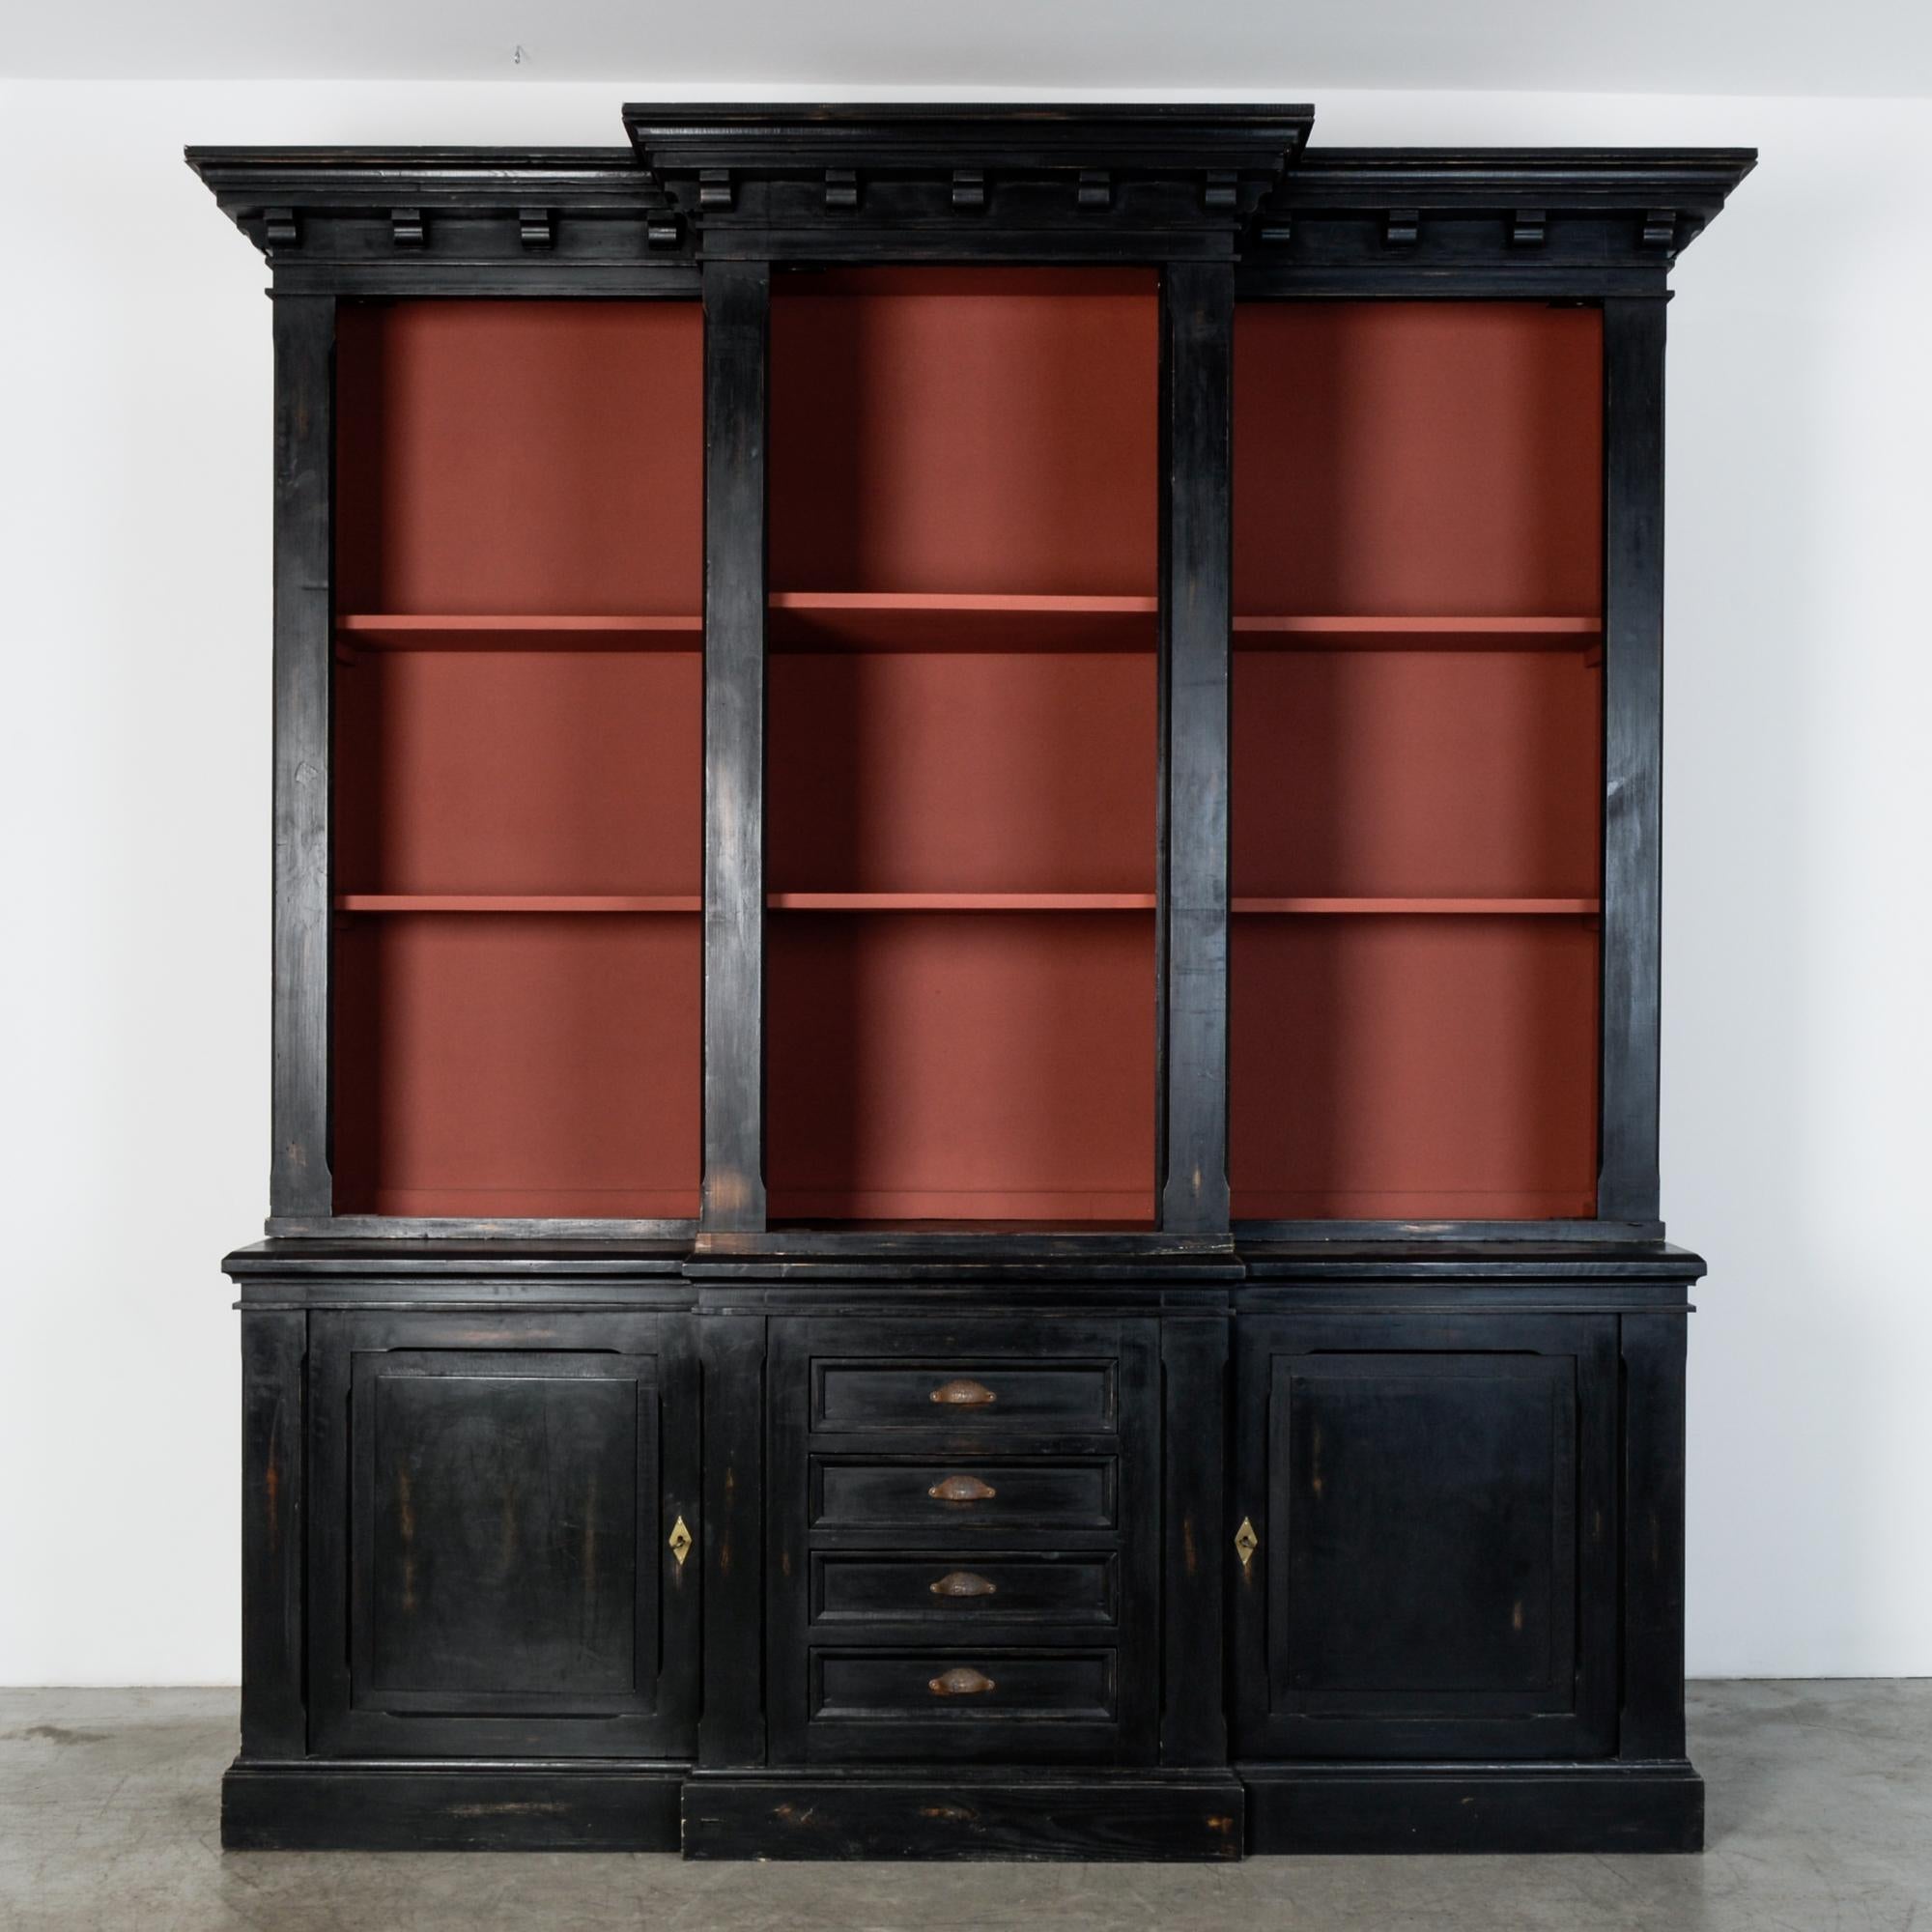 A modern re-creation based on neoclassic style, this black painted cabinet features a two-door base with 4-drawer chest, supporting a tall upper shelving unit, painted in dramatic color. Recessed panel construction and well proportioned moulding